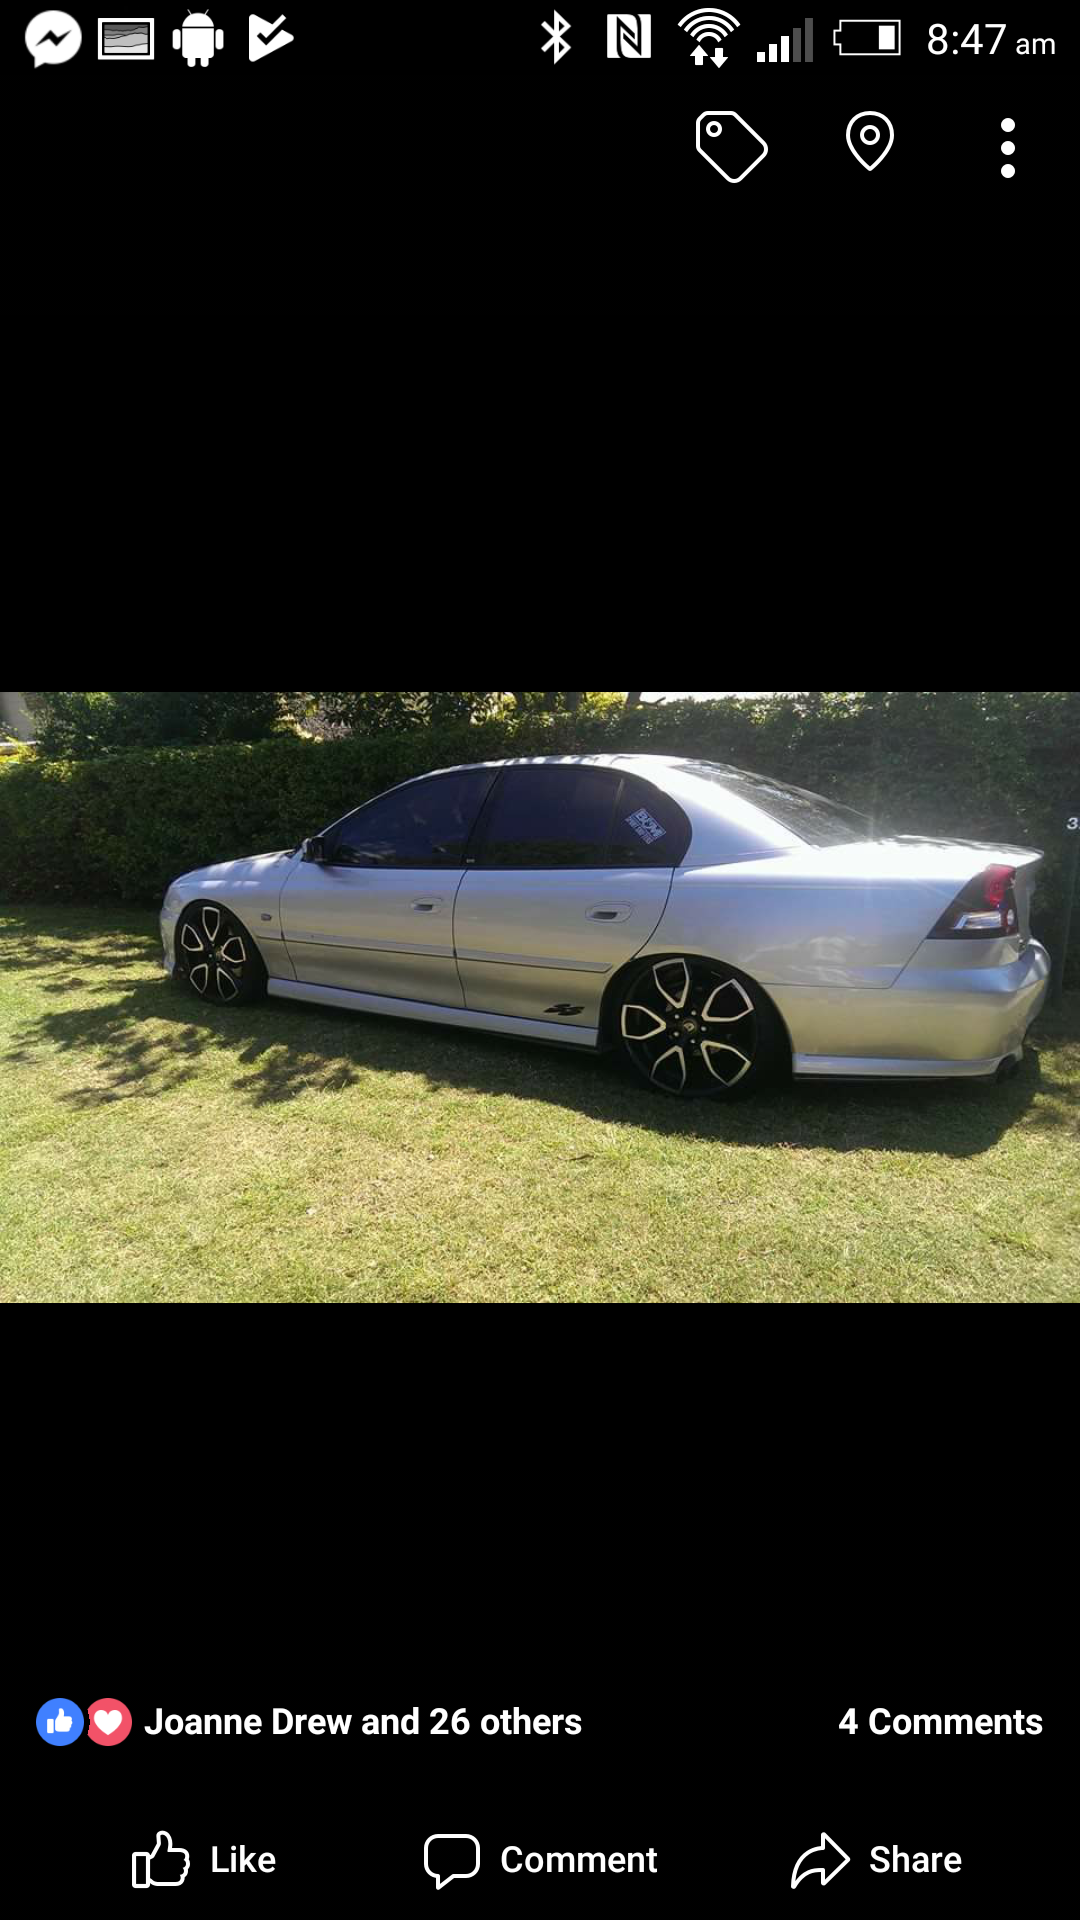 2004 Holden Commodore SS VYII